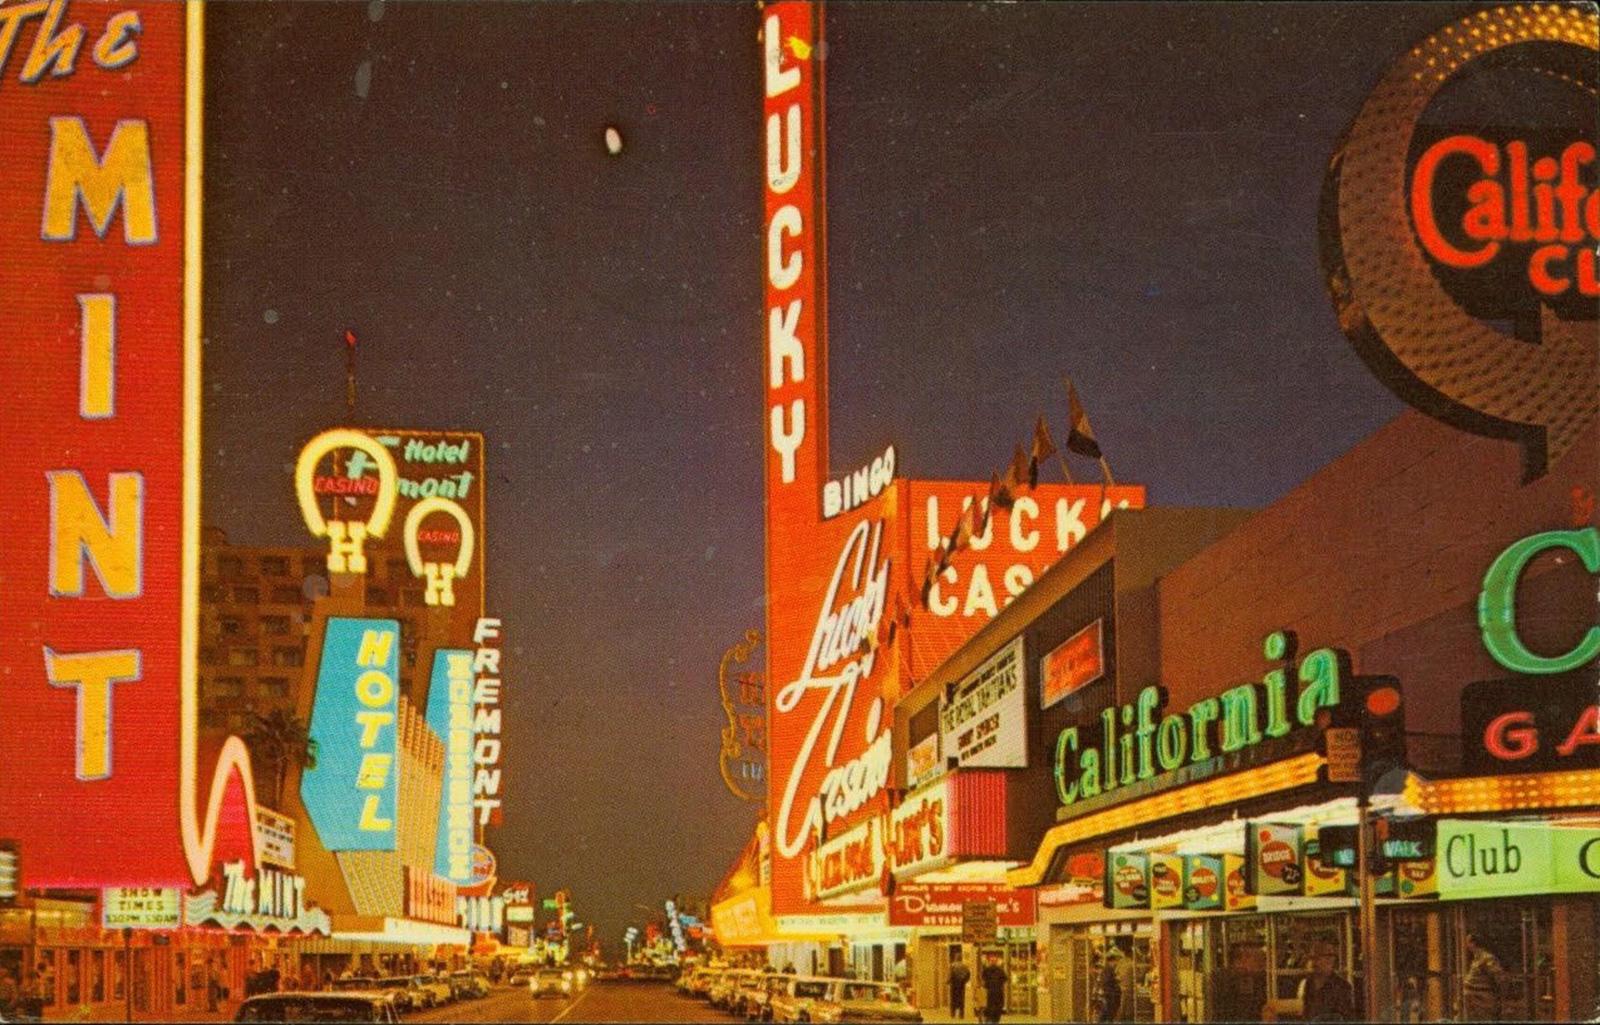 A 1950s city street with many lit up signs including Lucky Casino, The Mint, and hotels.